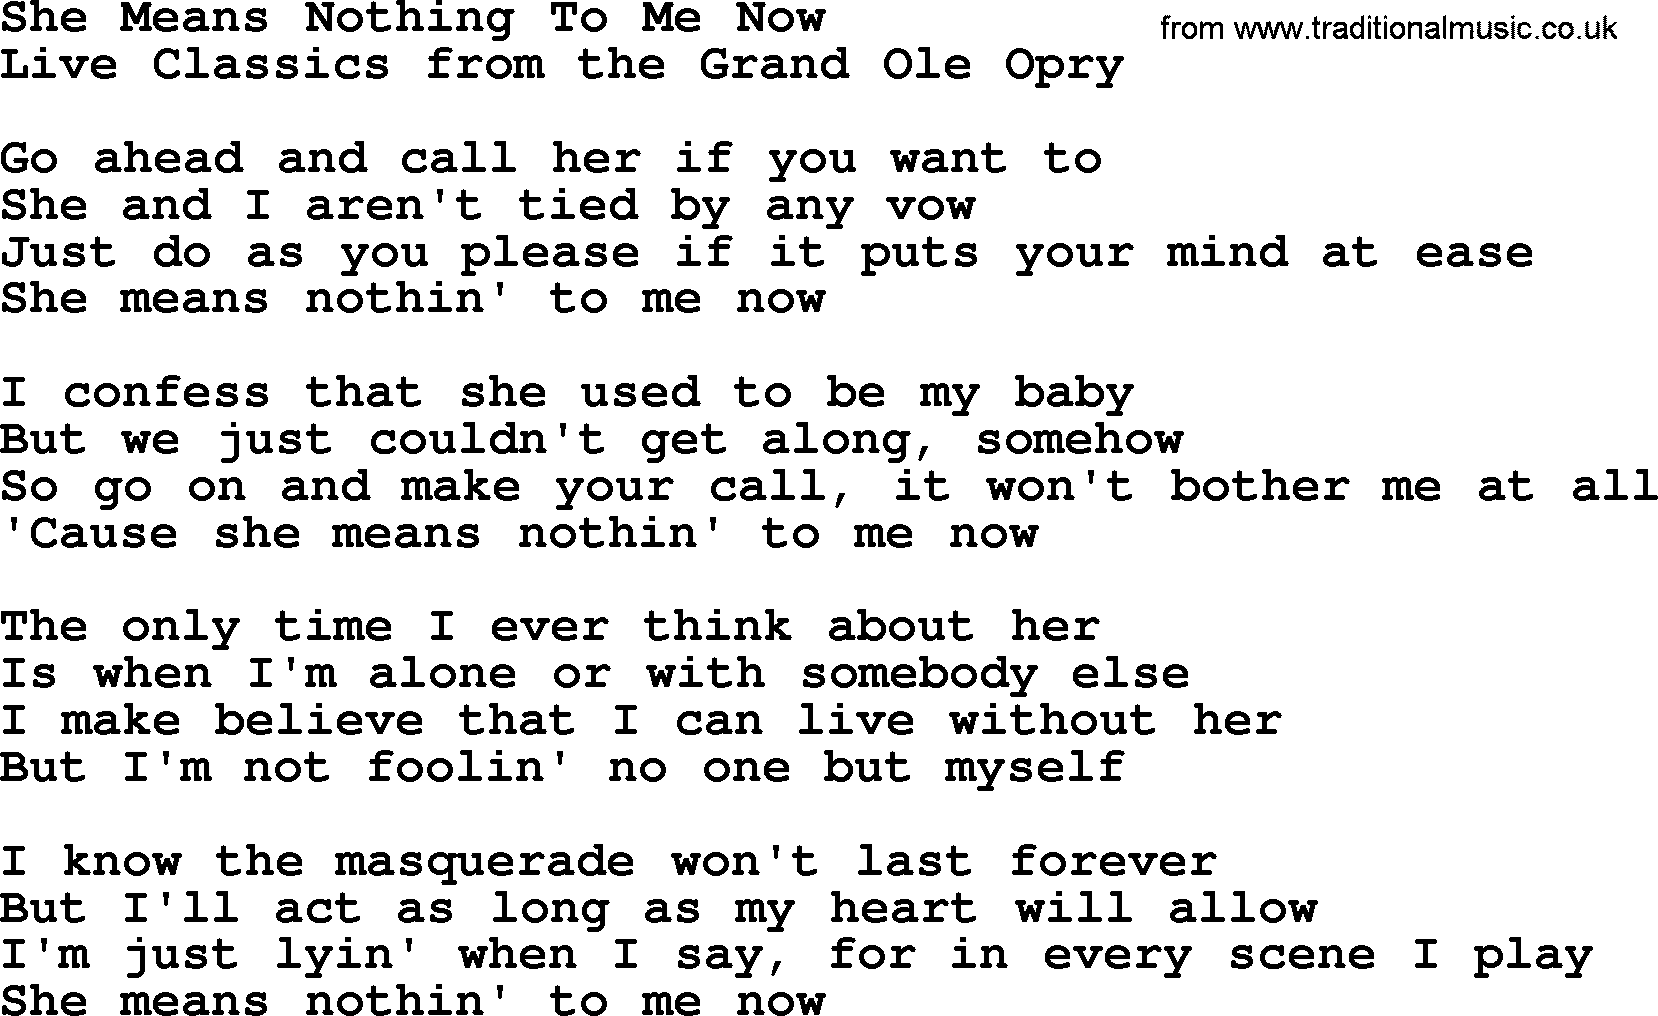 Marty Robbins song: She Means Nothing To Me Now, lyrics